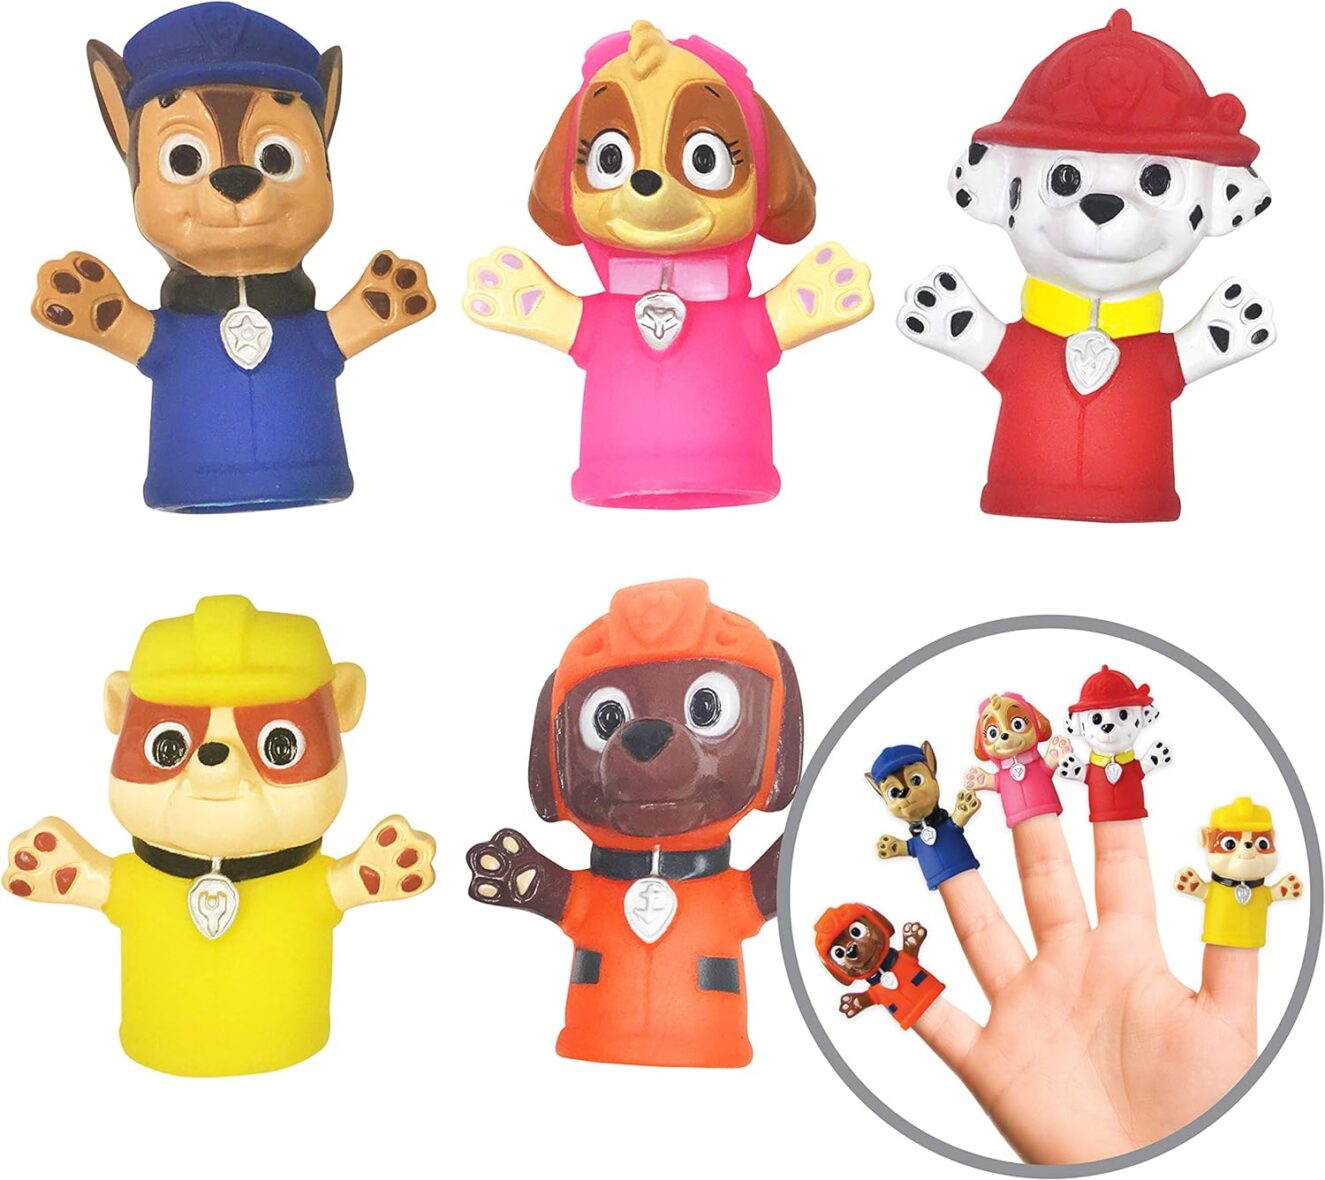 ickelodeon PAW Patrol Bath Finger Puppets, 7 Pc – Party Favors, Educational, Bath Toys, Floating Pool Toys, Beach Toys, Finger Toys, Story Time, Playtime